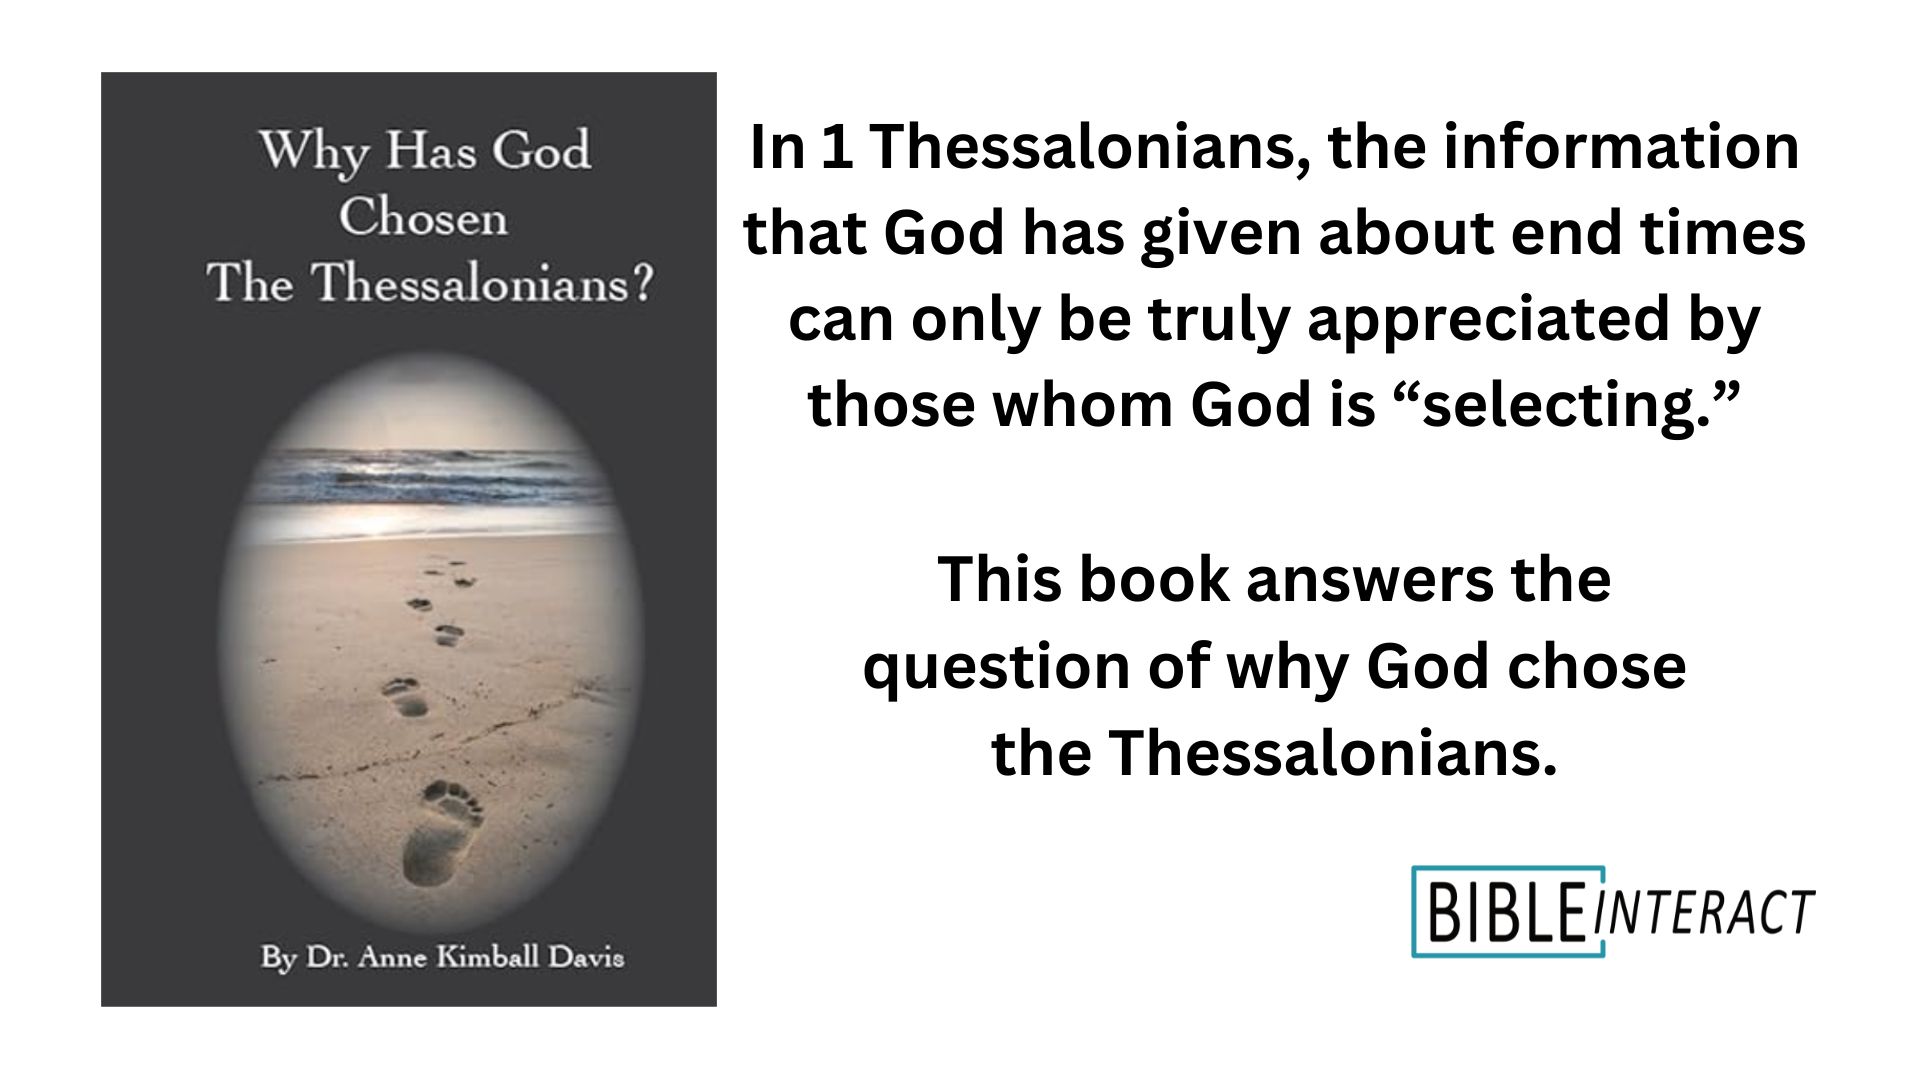 📕 Why Has God Chosen the Thessalonians?